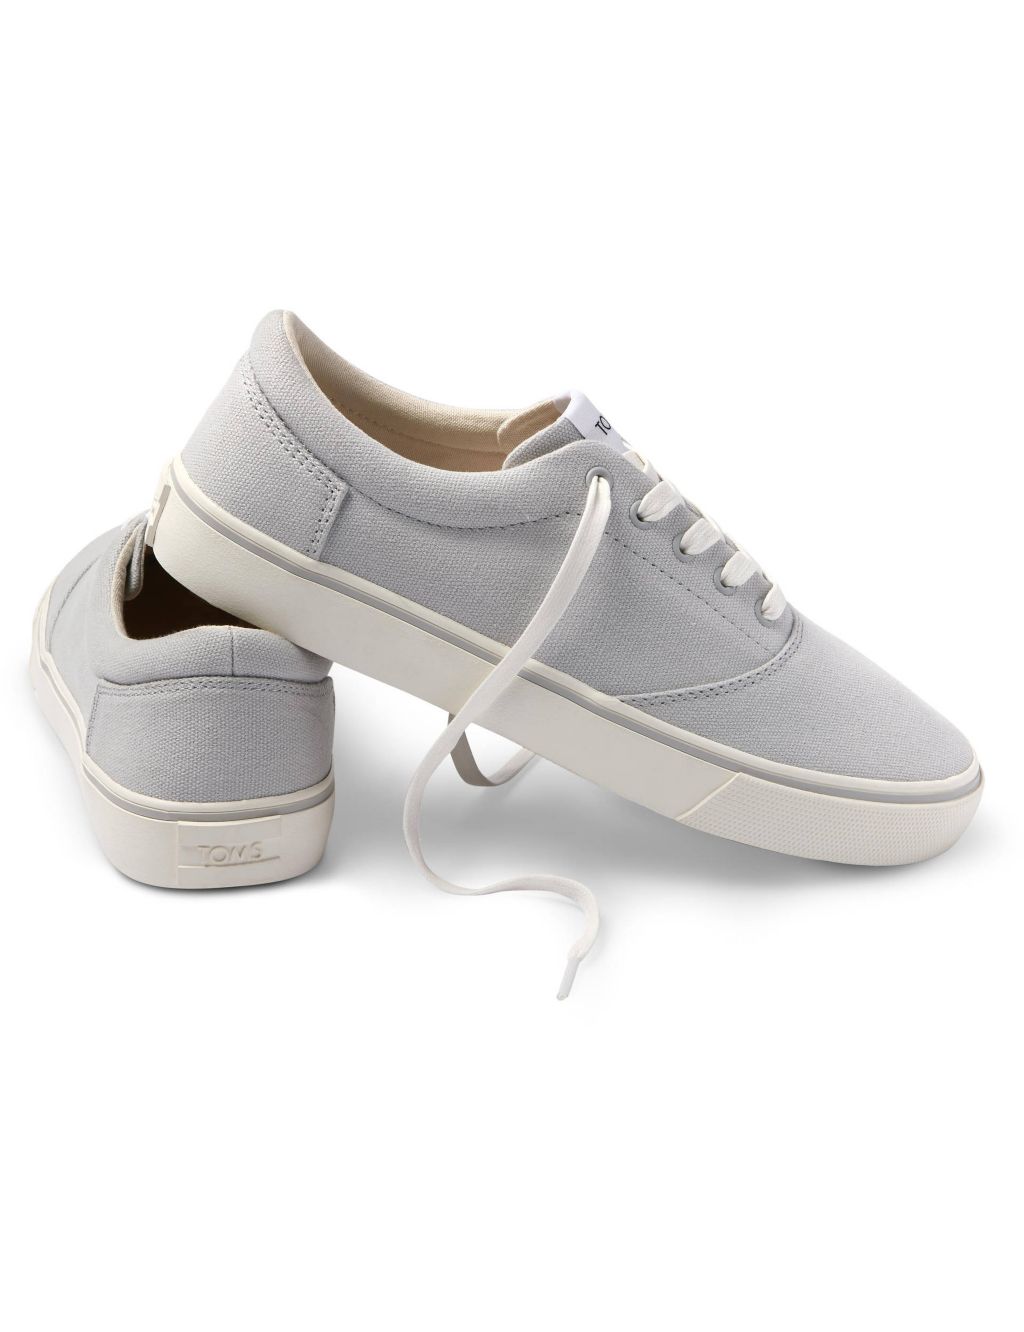 Canvas Lace Up Trainers image 5